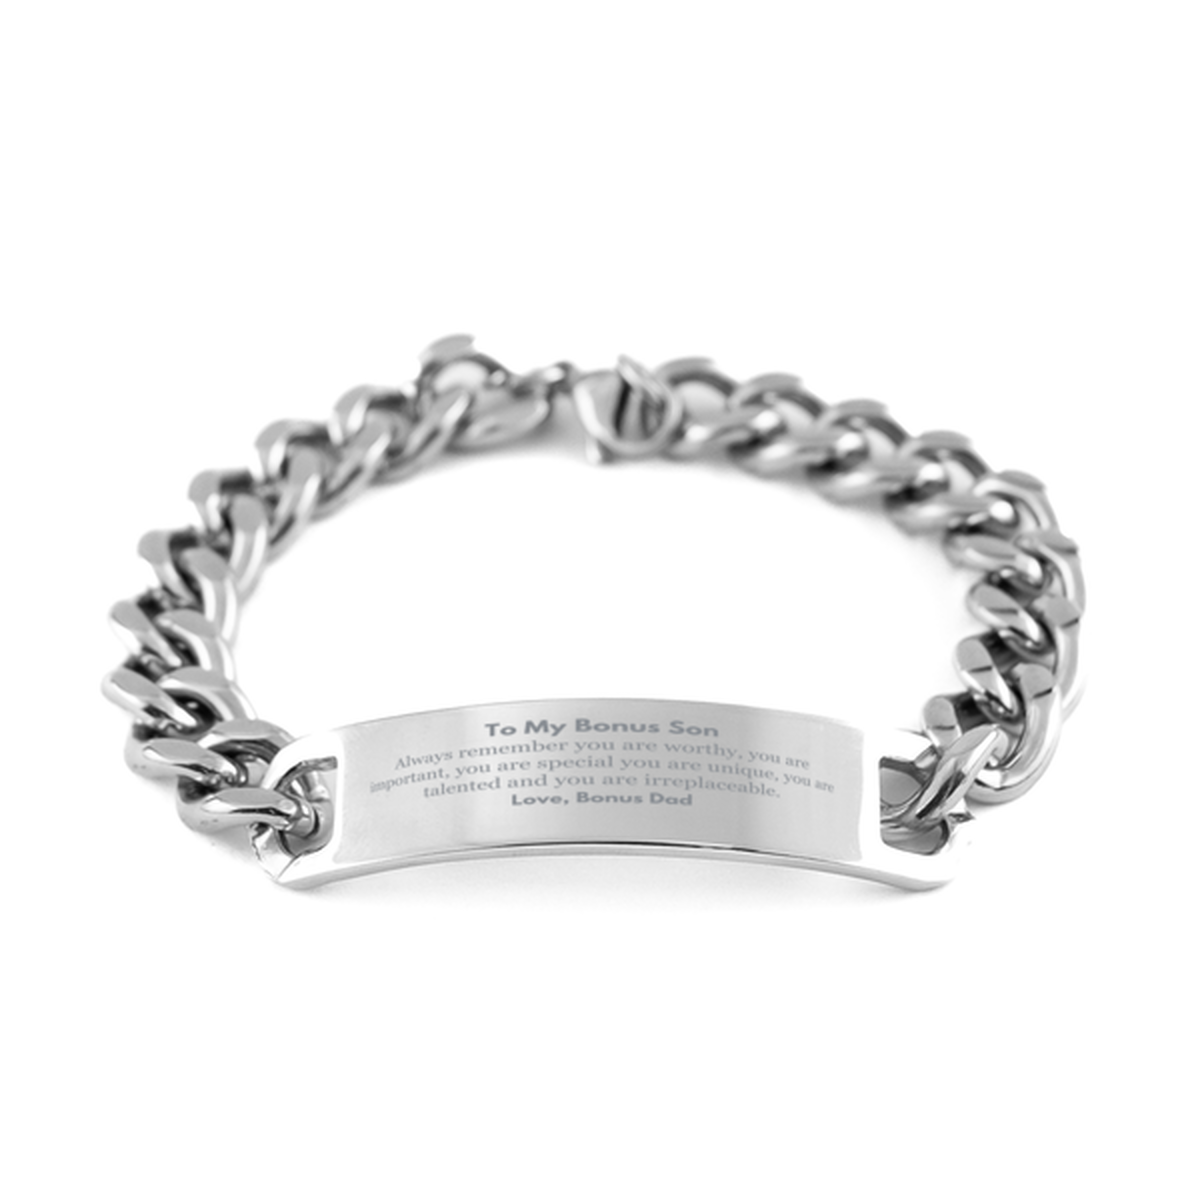 Bonus Son Birthday Gifts from Bonus Dad, Inspirational Cuban Chain Stainless Steel Bracelet for Bonus Son Christmas Graduation Gifts for Bonus Son Always remember you are worthy, you are important. Love, Bonus Dad